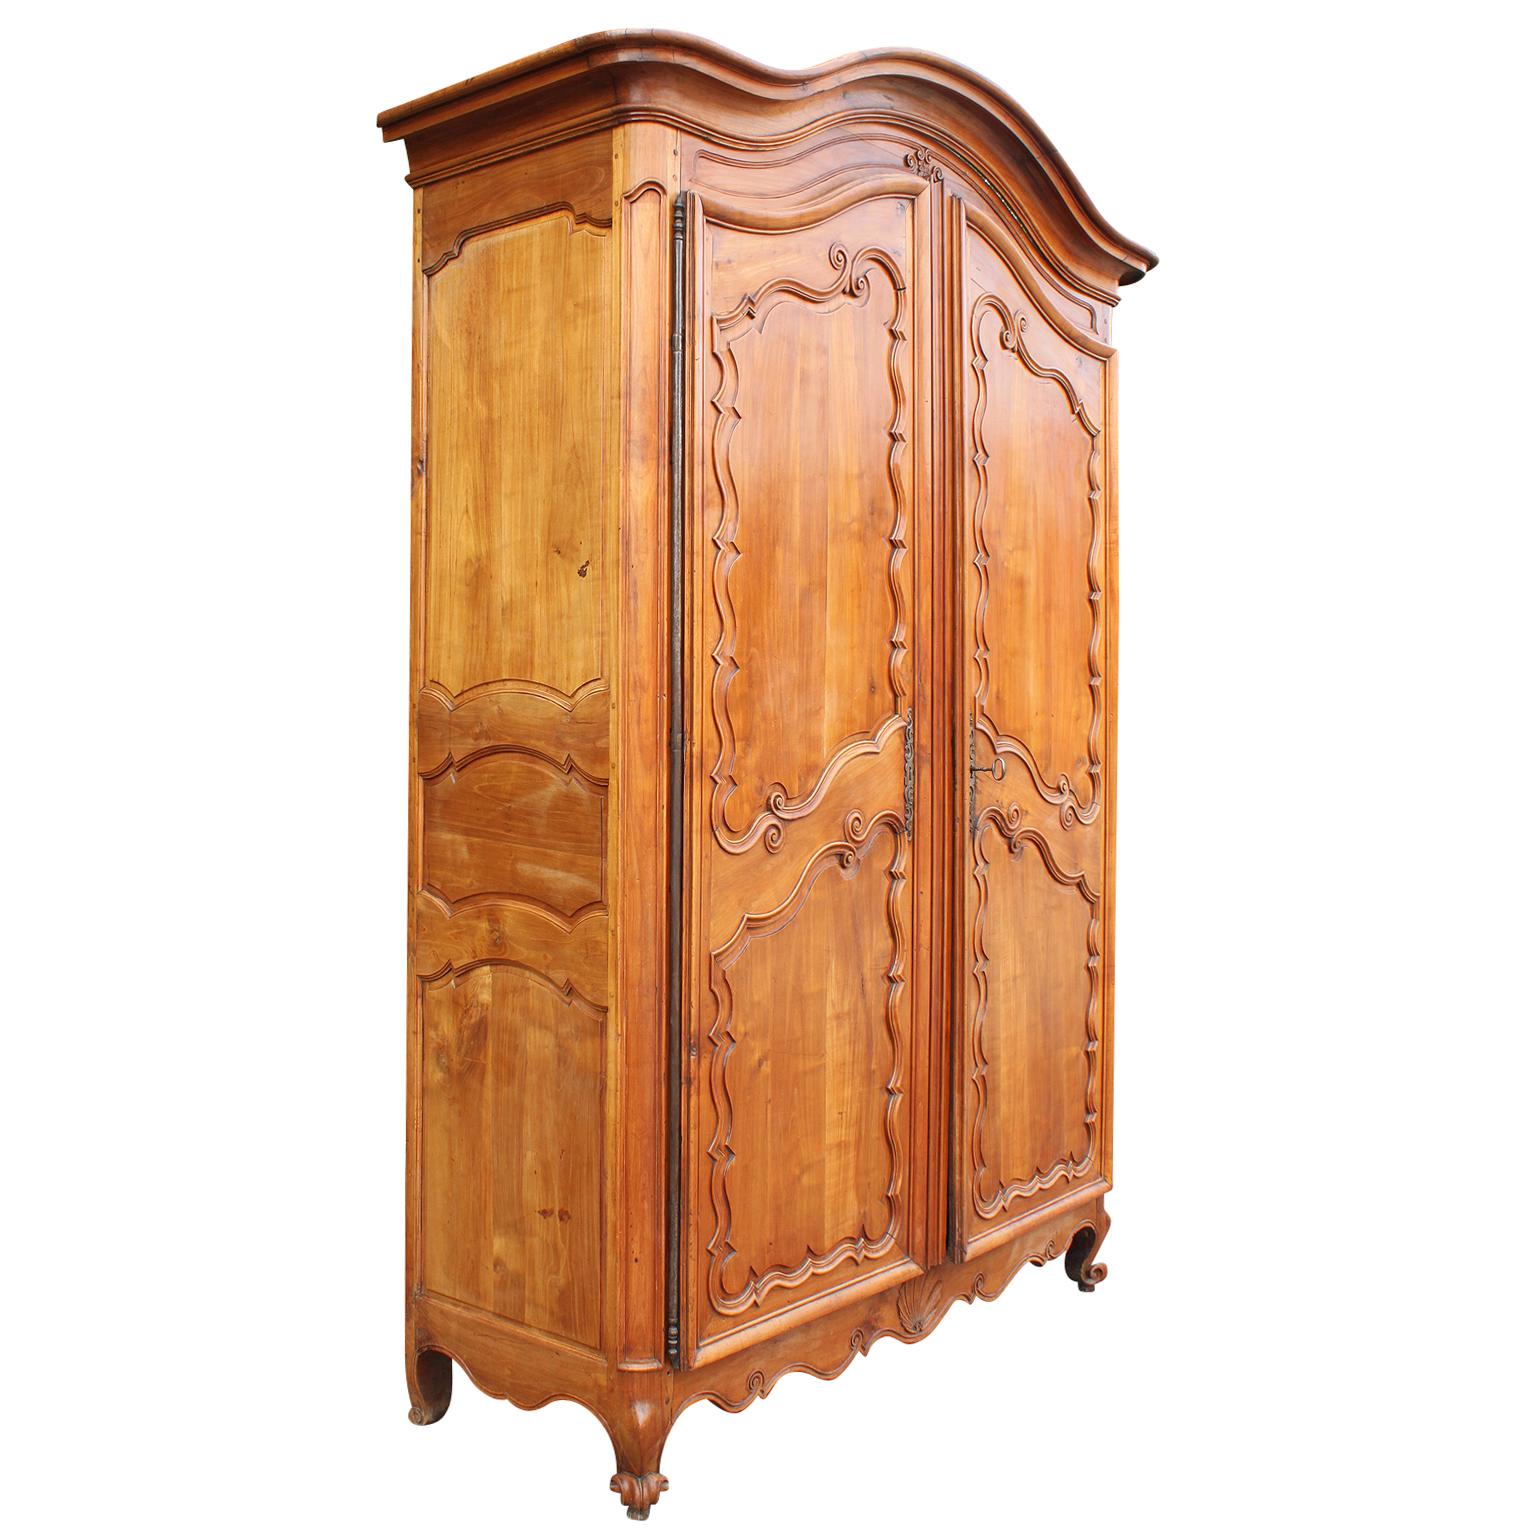 A fine and large French 19th century Louis XV style walnut carved two-door provincial armoire (wardrobe), the interior fitted with four pine shelves and with all original hardware and key, Provence, circa 1850.

Measures: Height 112 inches (284.5